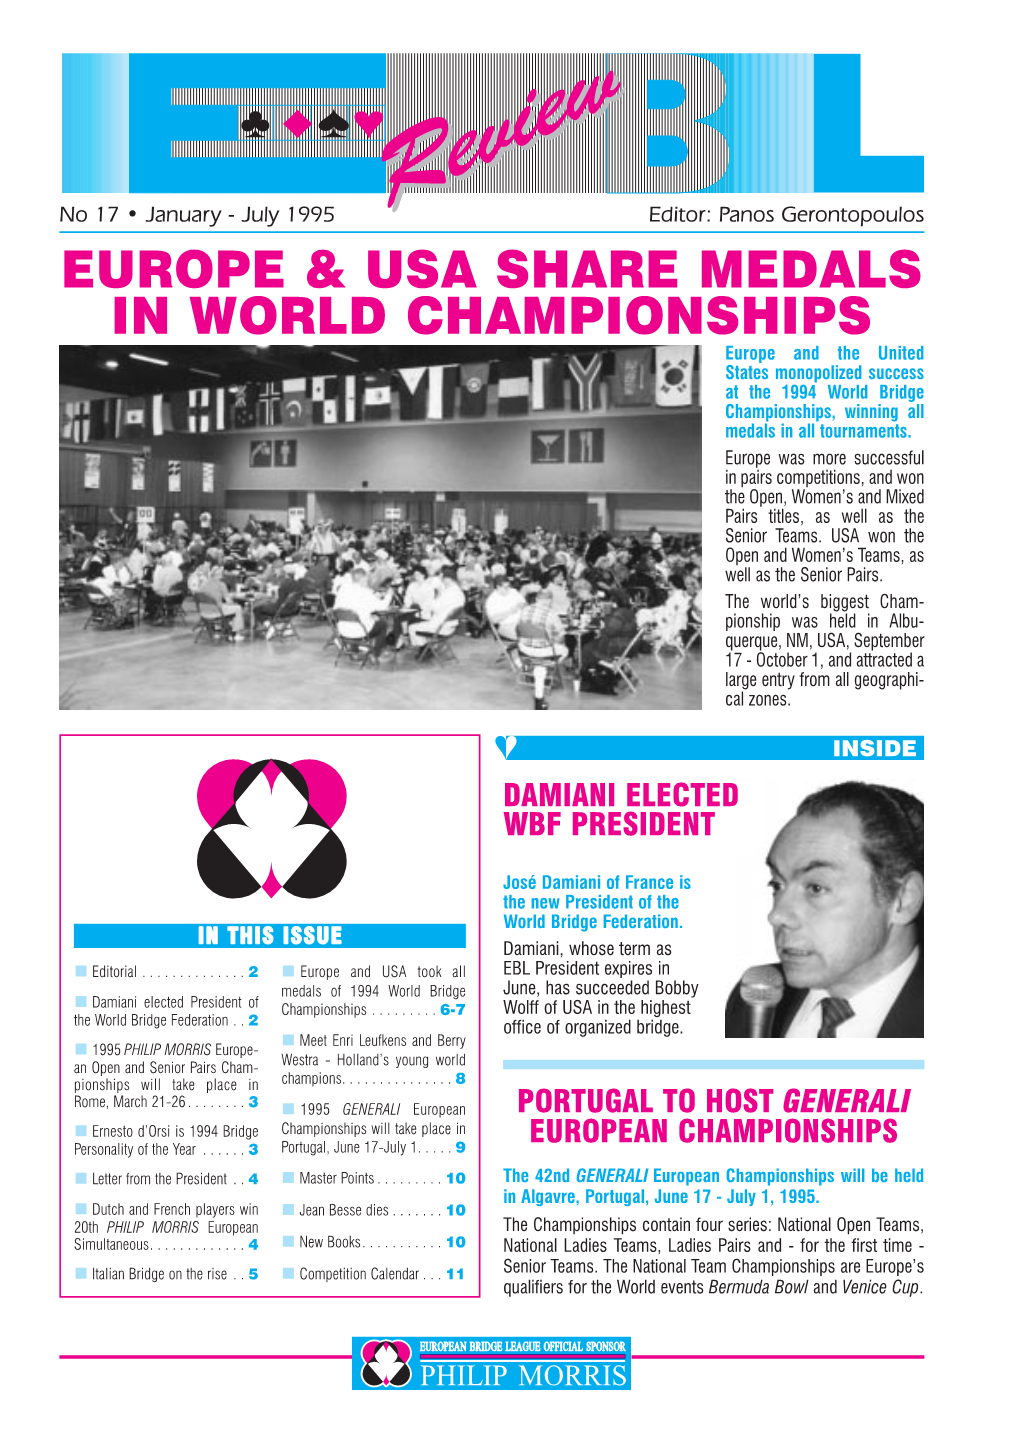 Europe & Usa Share Medals in World Championships